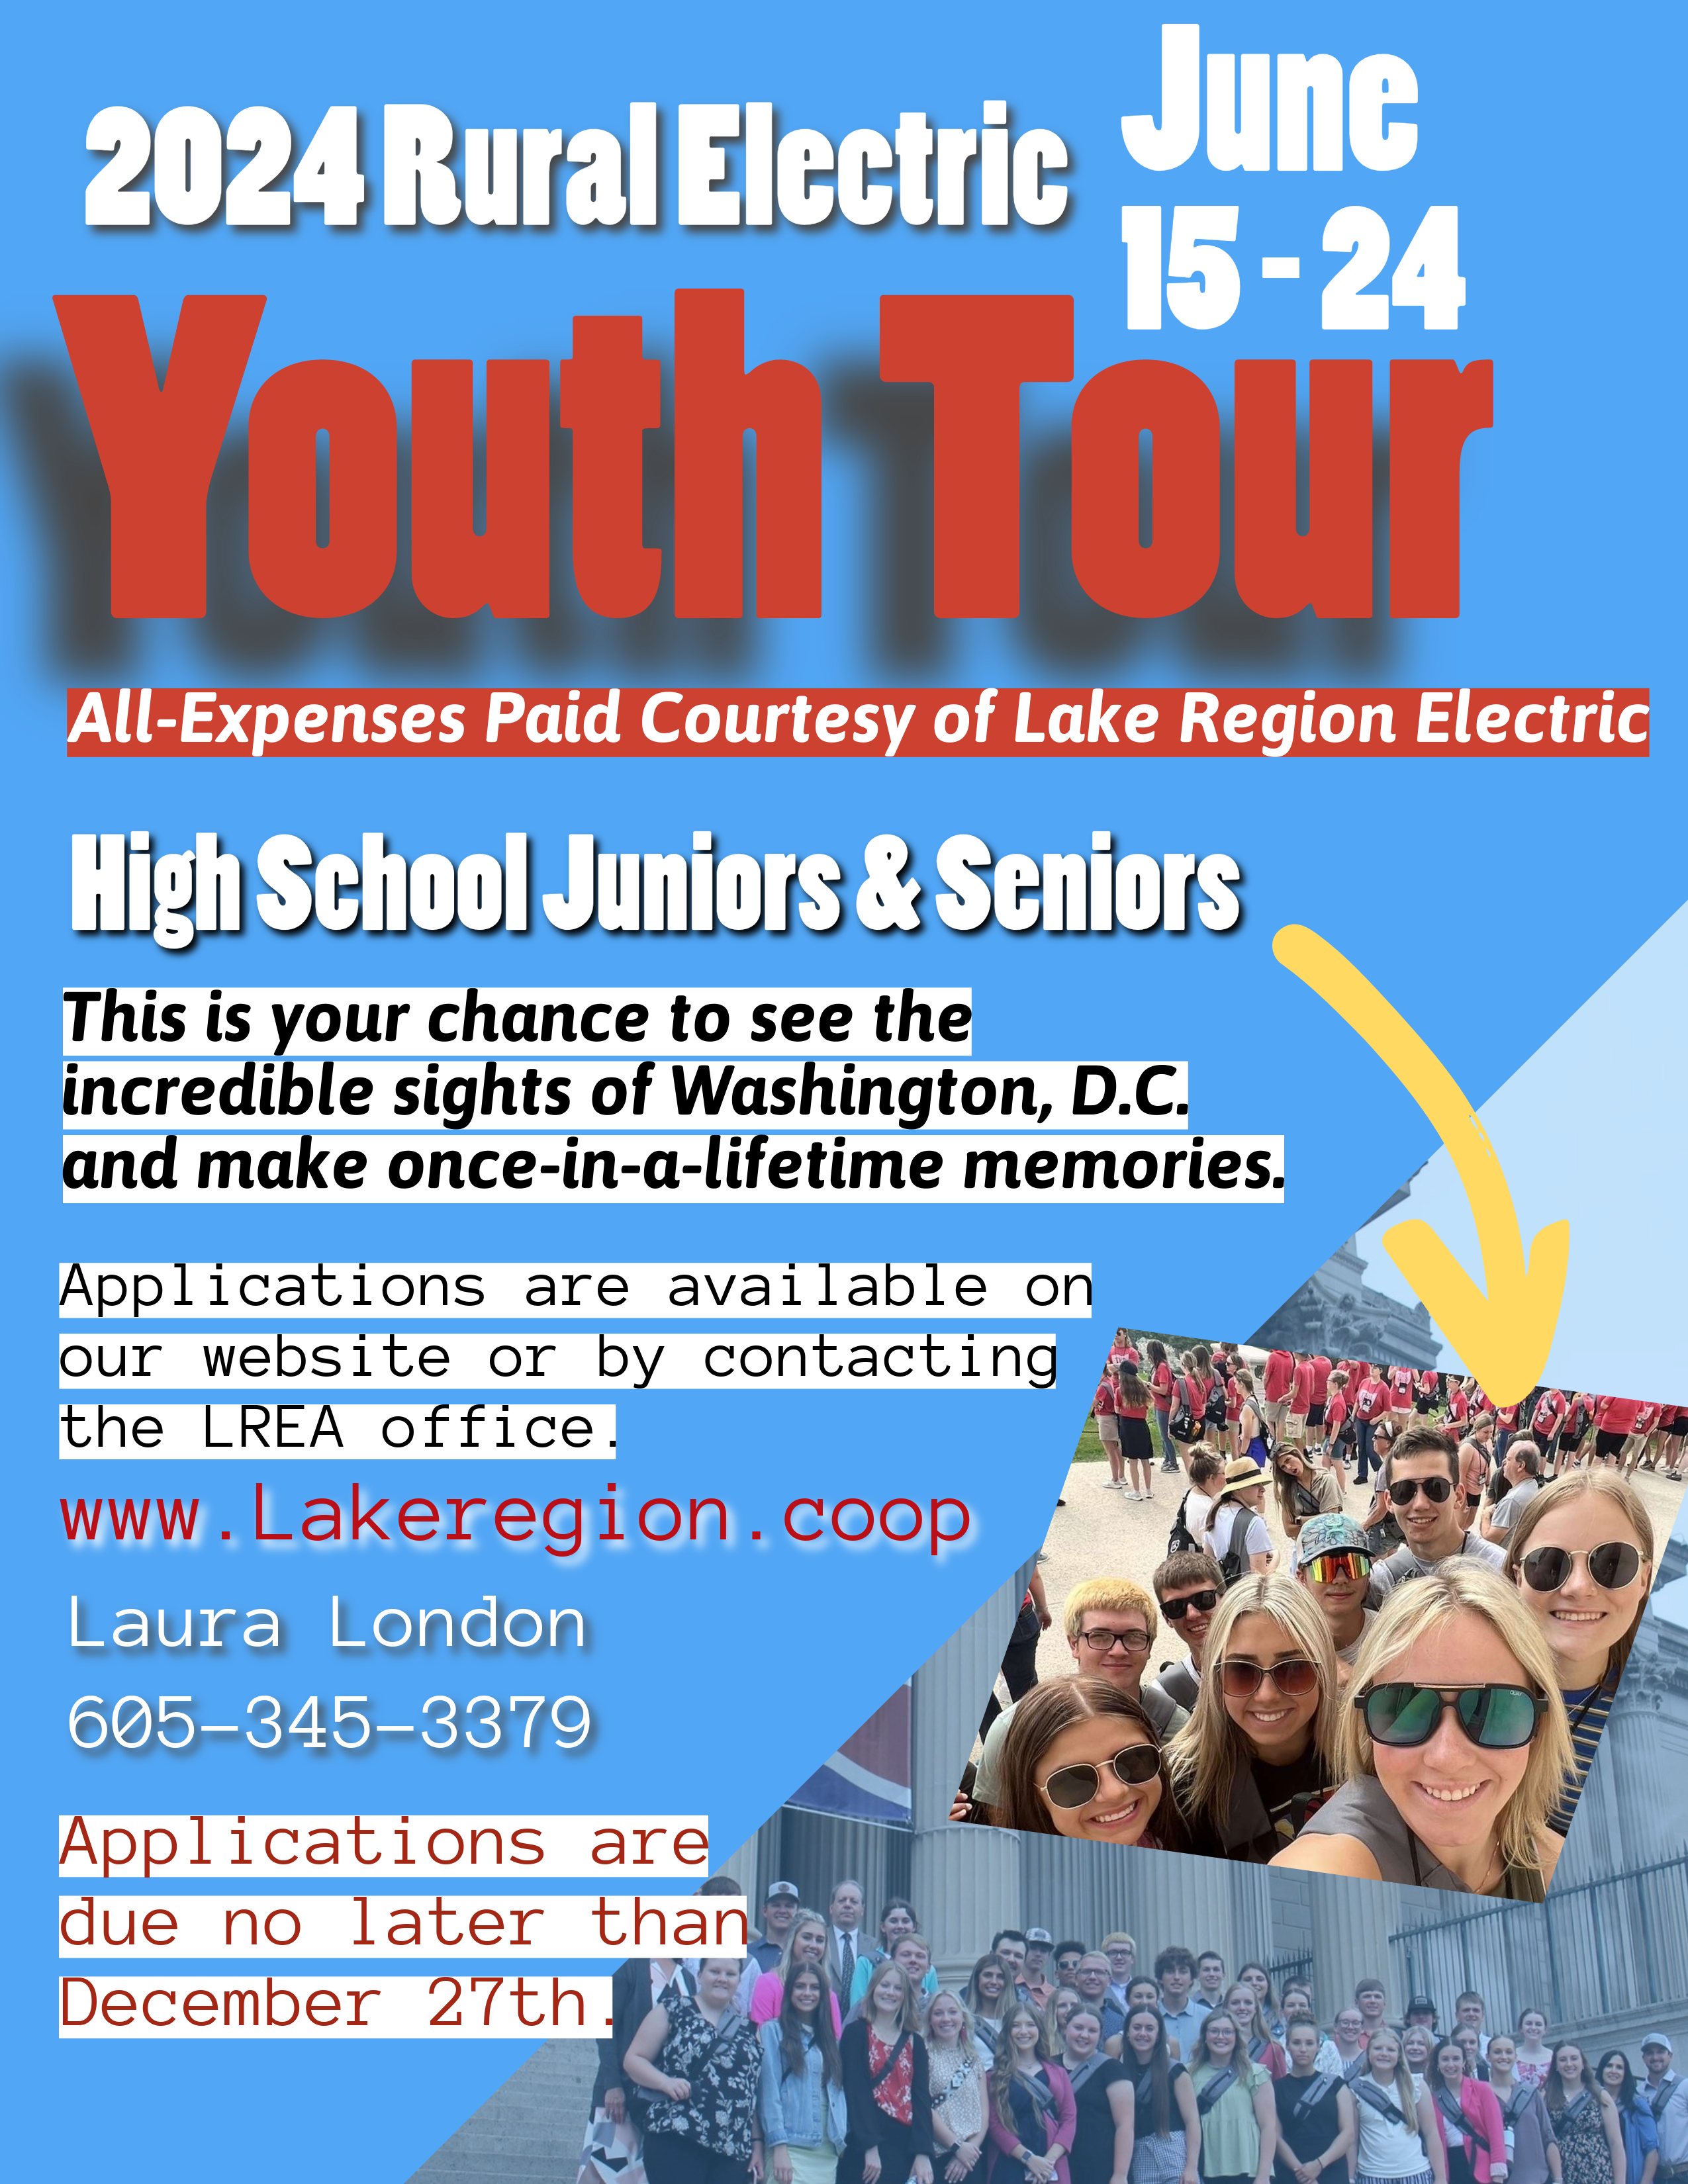 ad poster for youth tour with group of teens